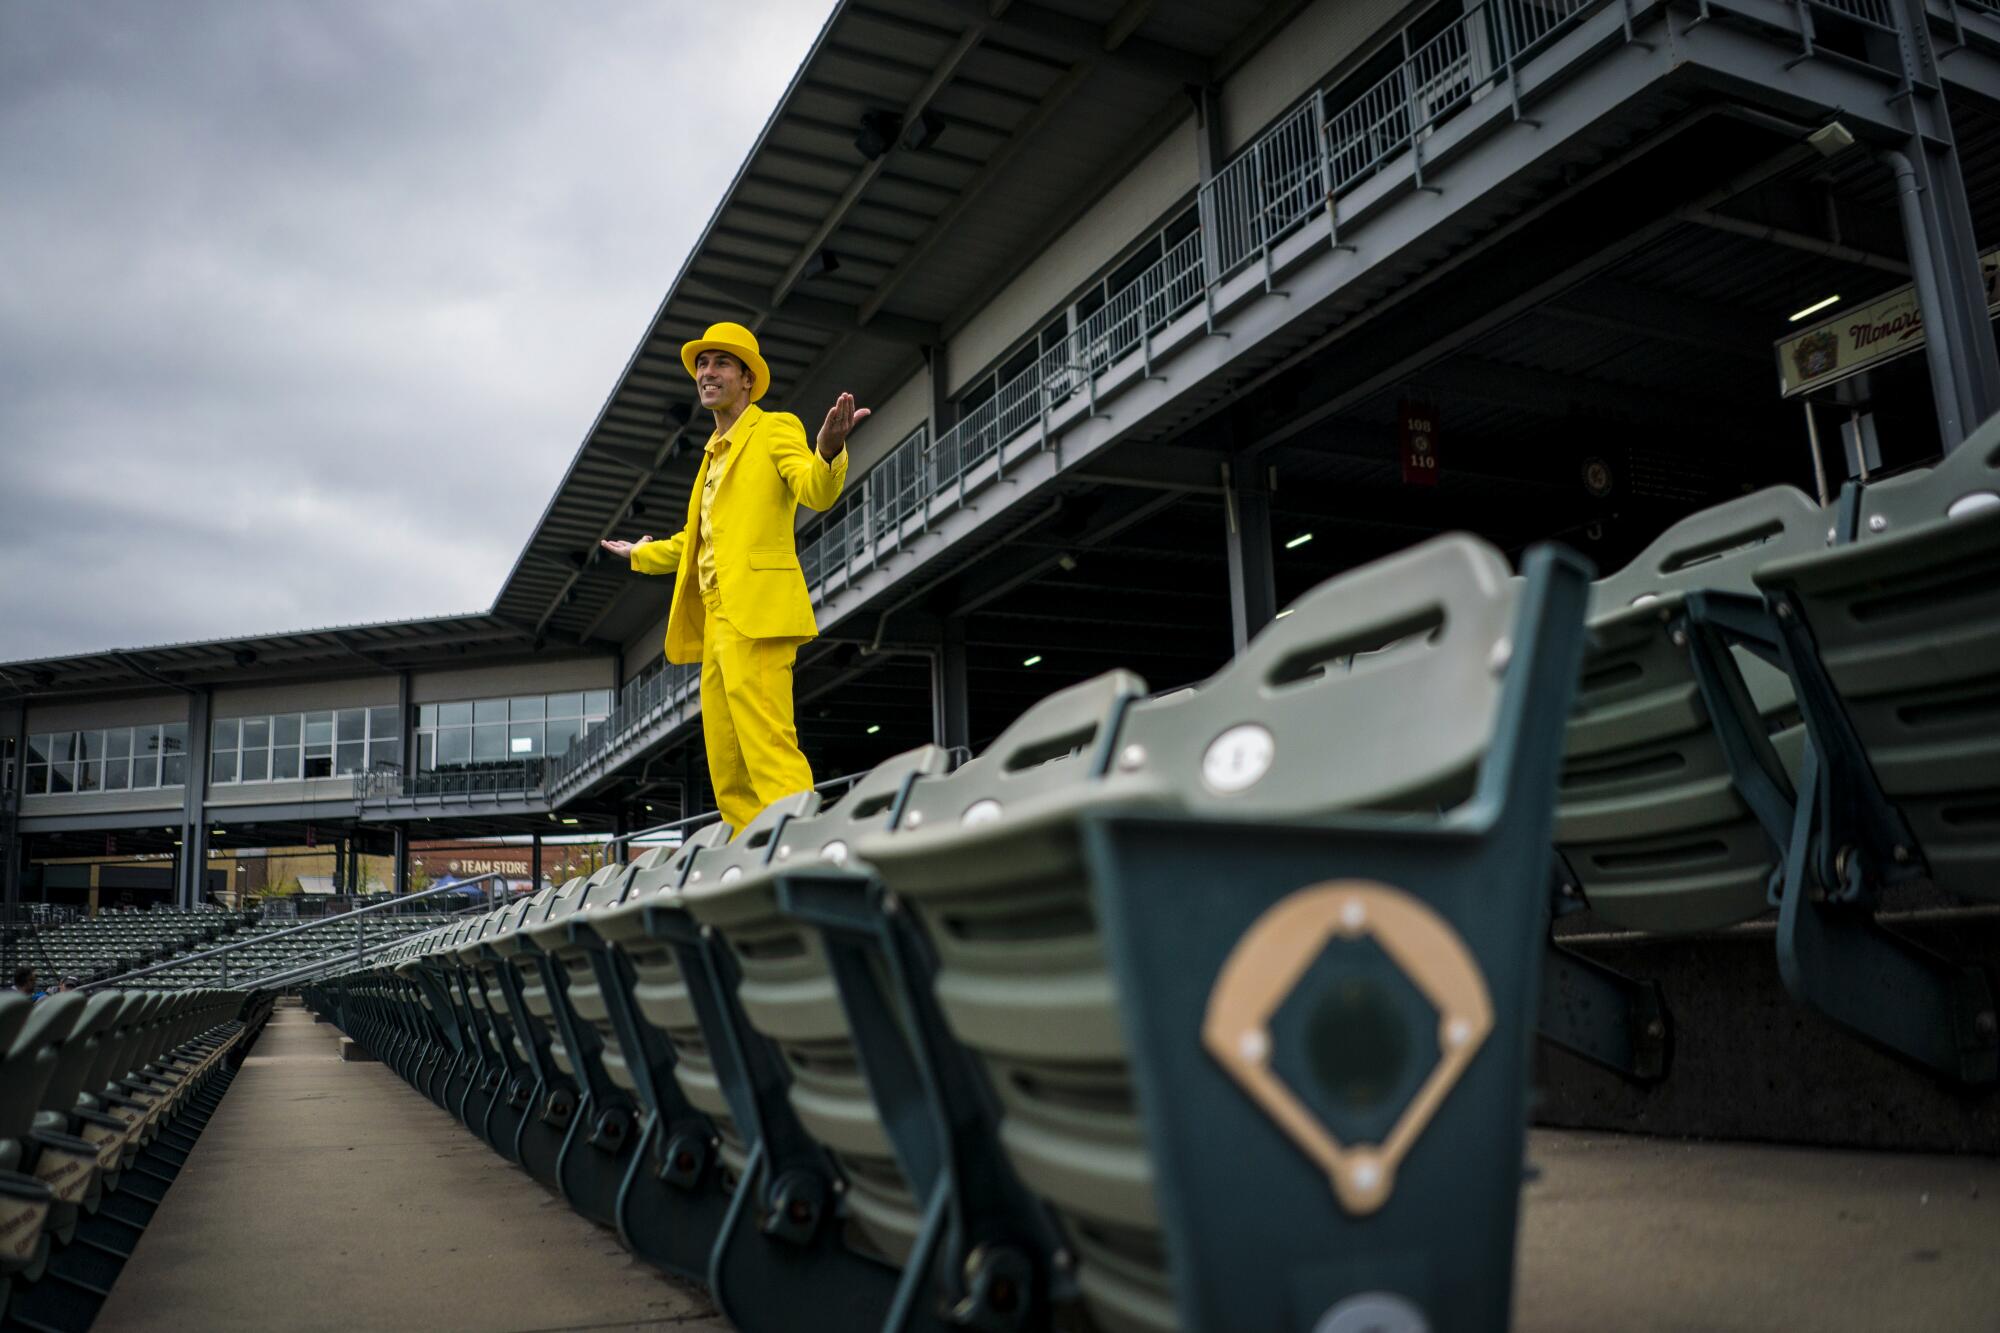 Meet the Savannah Bananas, who wow fans and have MLB's attention